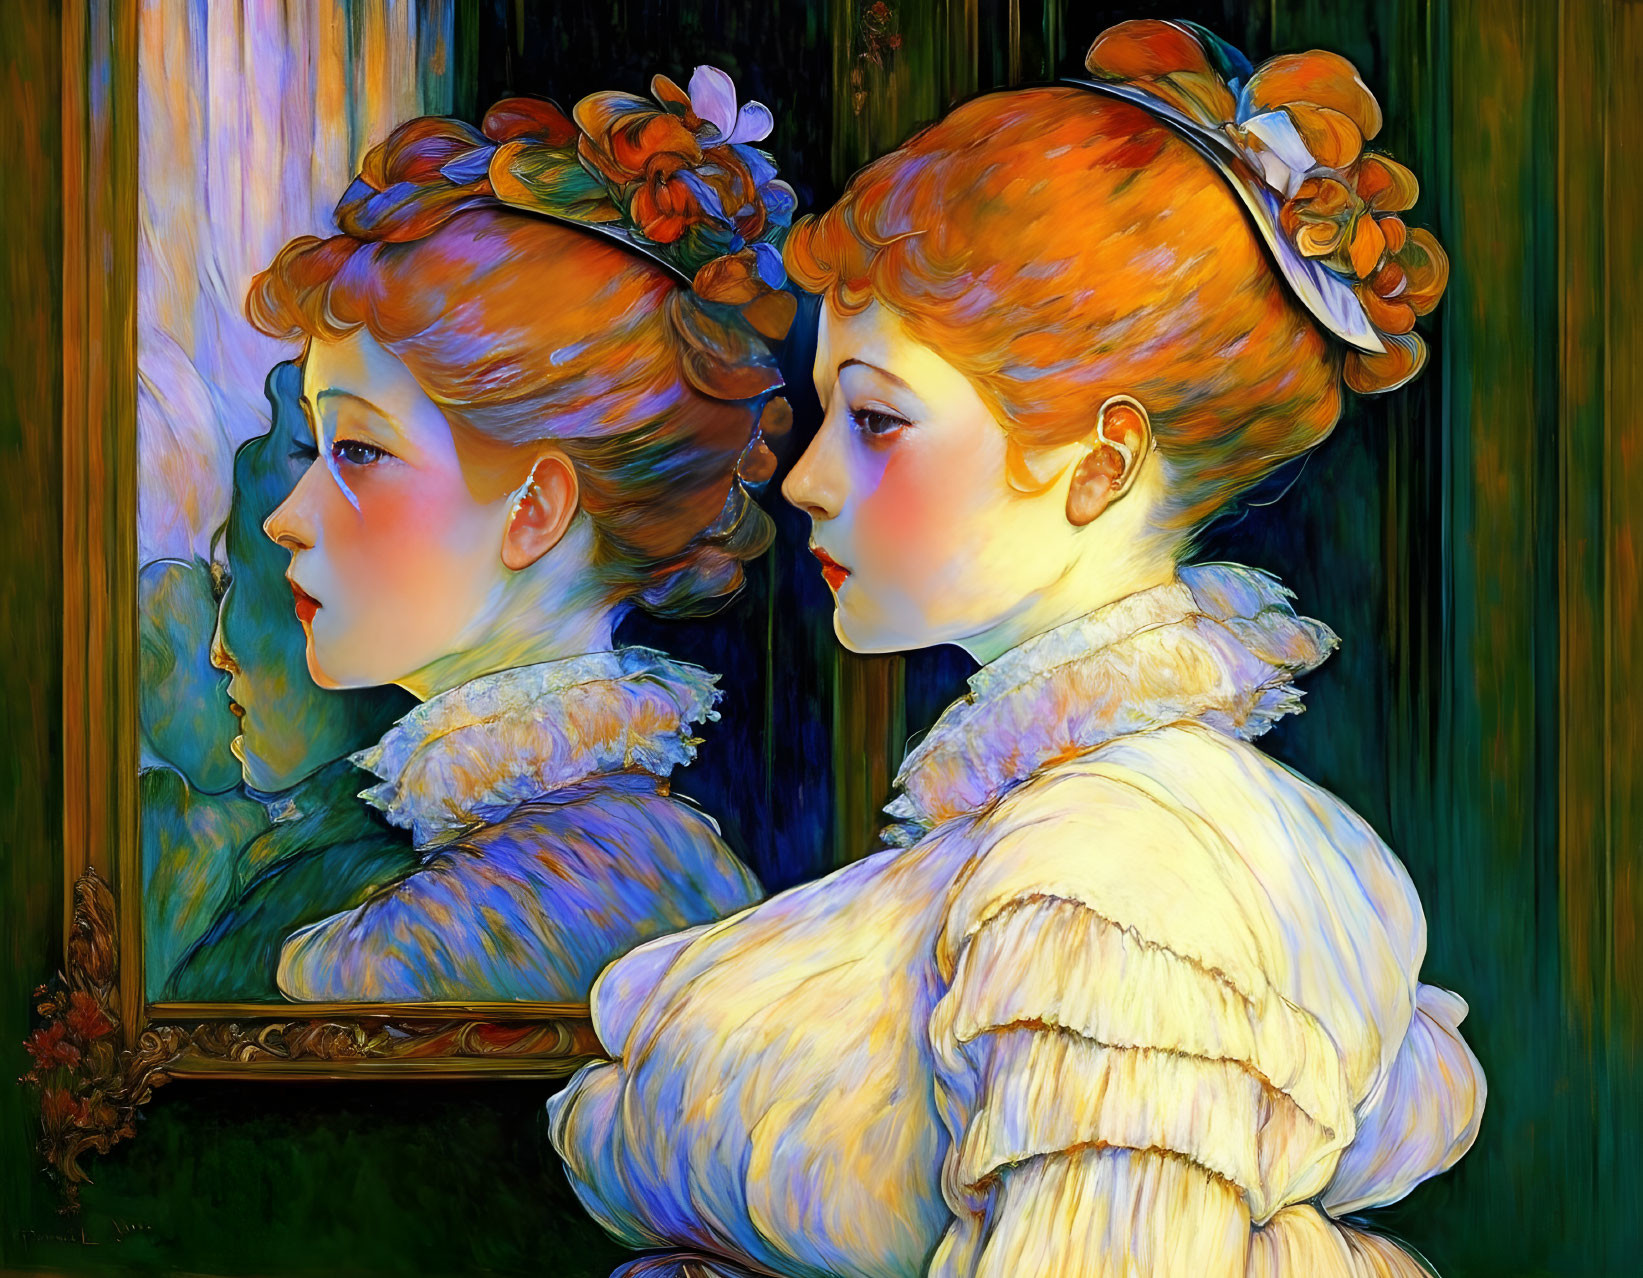 Red-haired woman with floral hair adornments contemplates mirror reflection